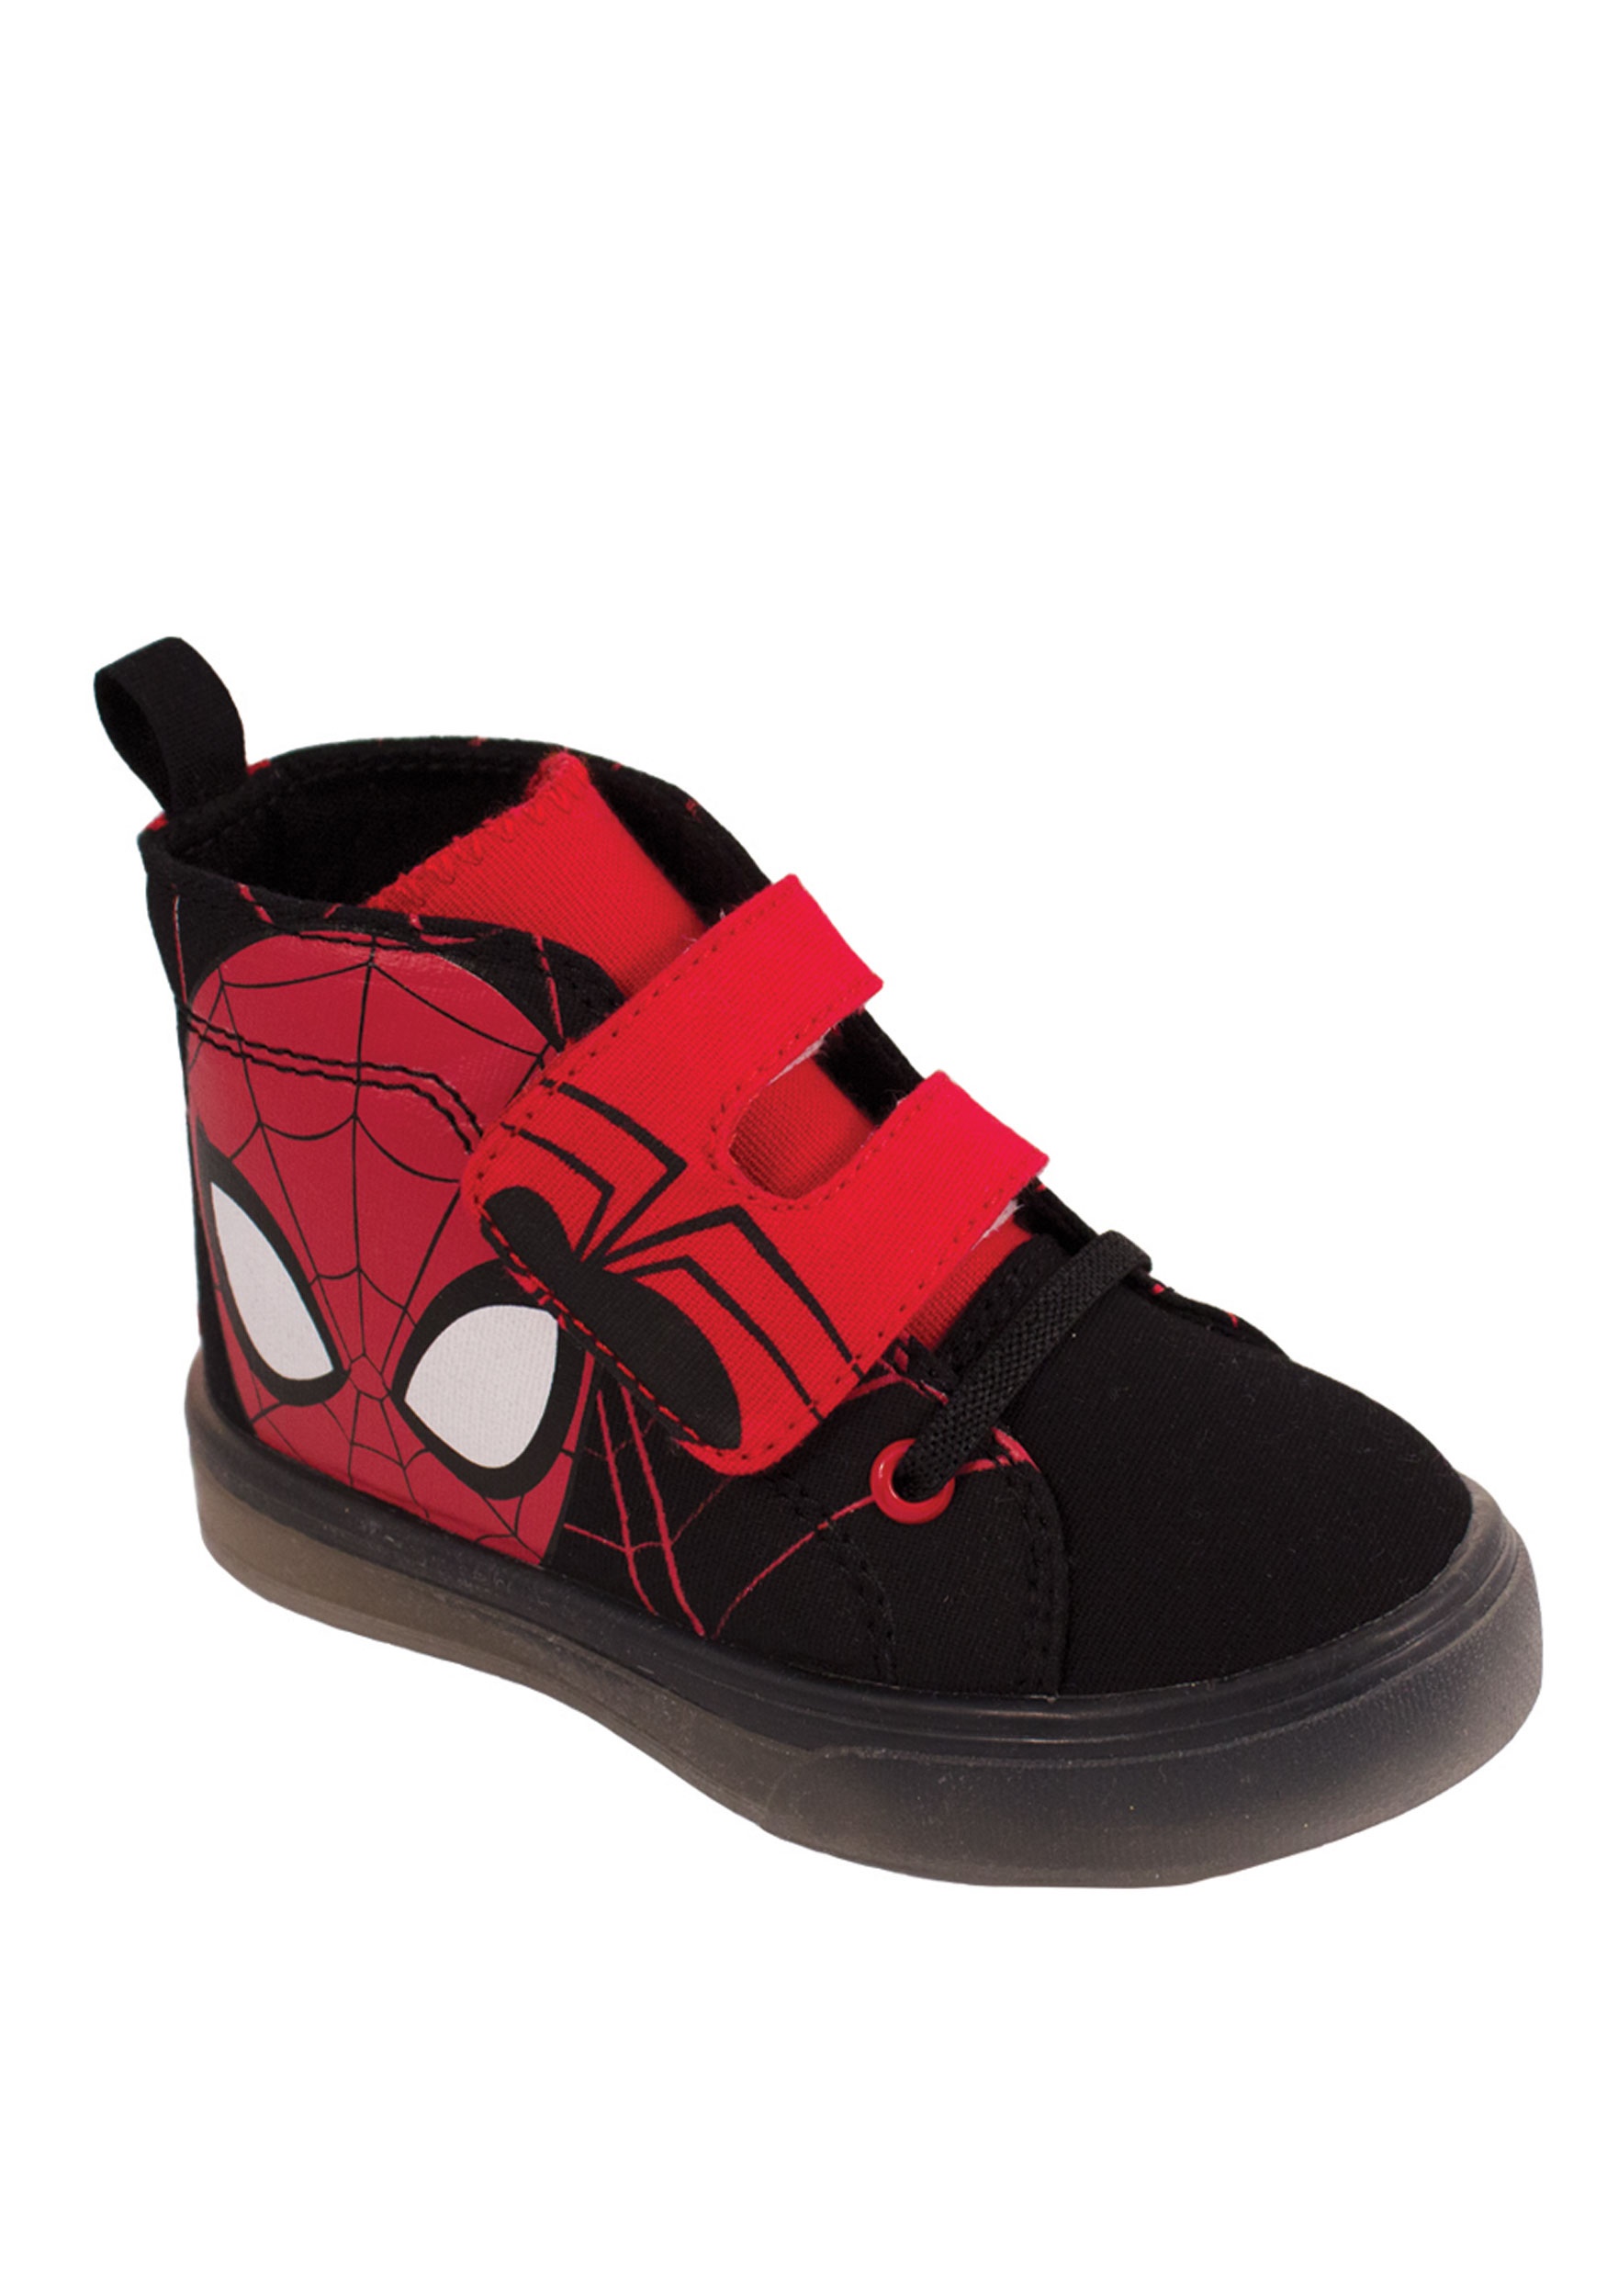 Spider-Man Child Sneakers